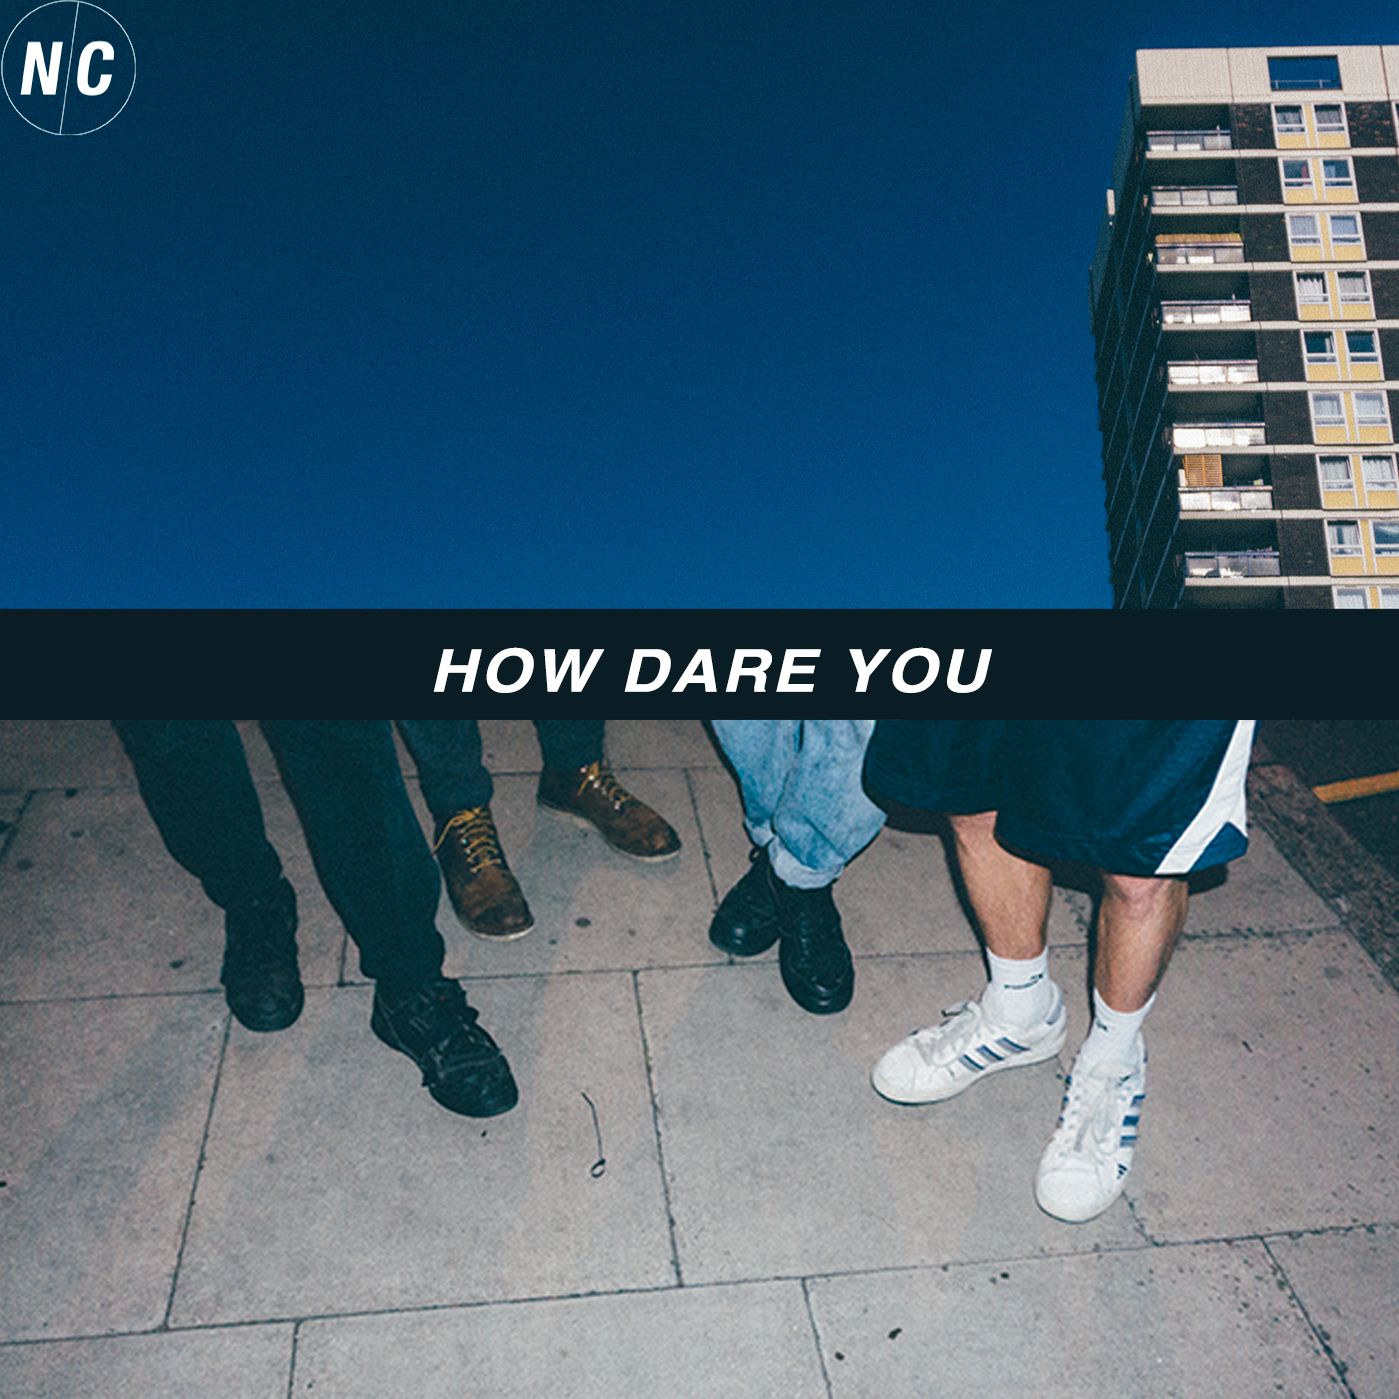 New Carnival – “How Dare You”